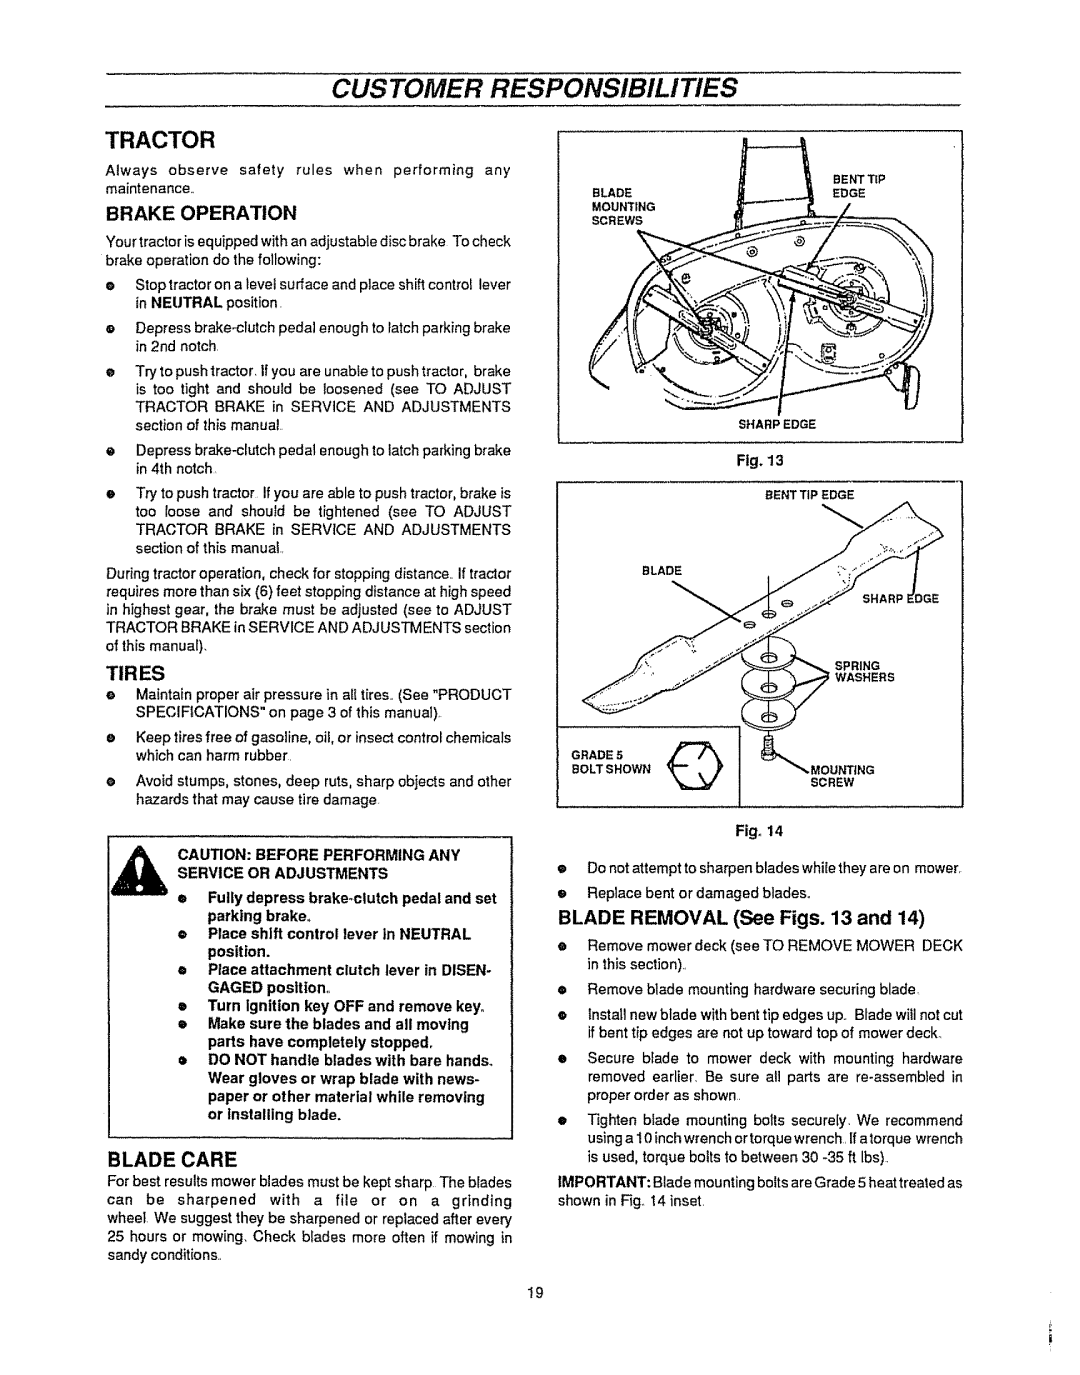 Sears 536.25587 owner manual Customer Responsibilities, Tractor, Blade Care, BLADE REMOVAL See Figs. 13 and 